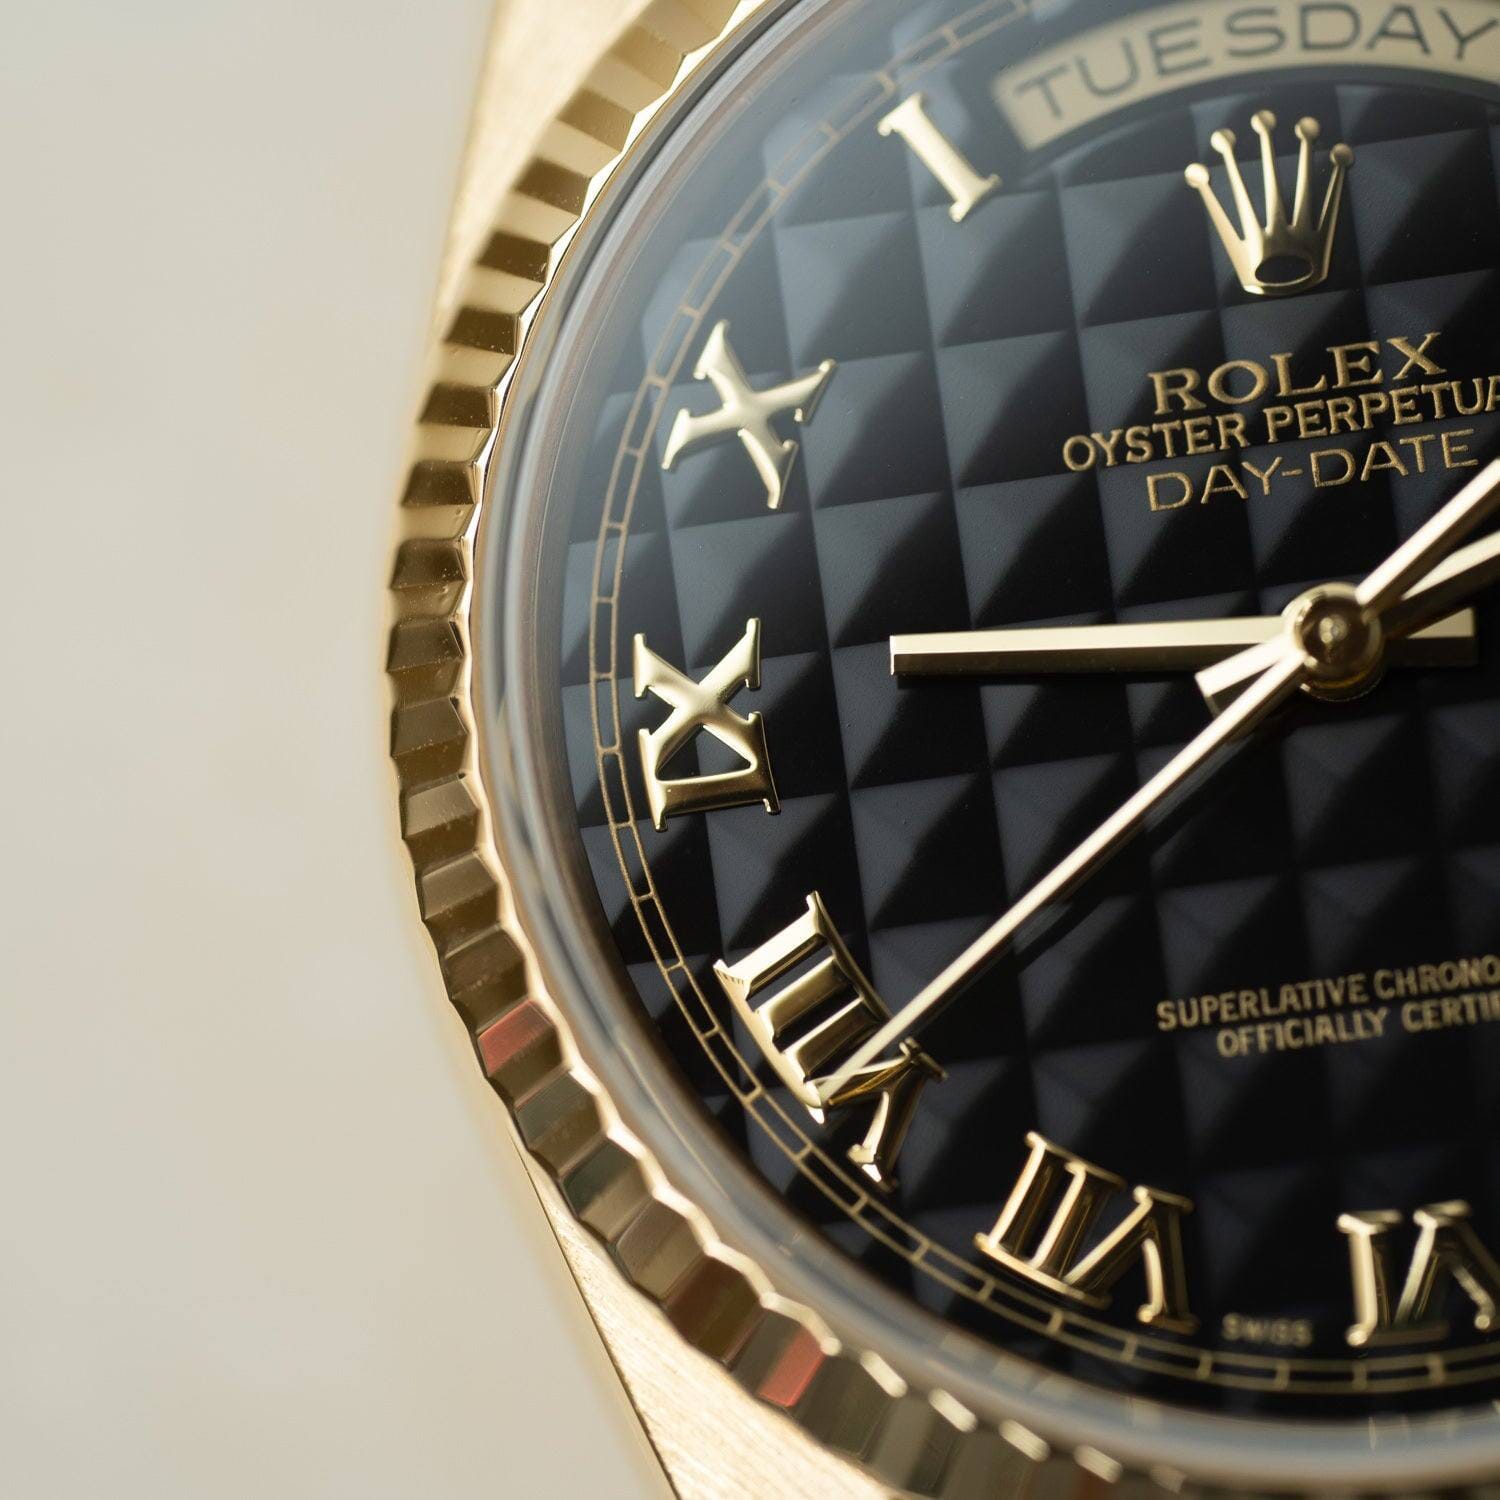 ROLEX Day-Date 18238 YG Black Pyramid Dial Box and Paper - Arbitro